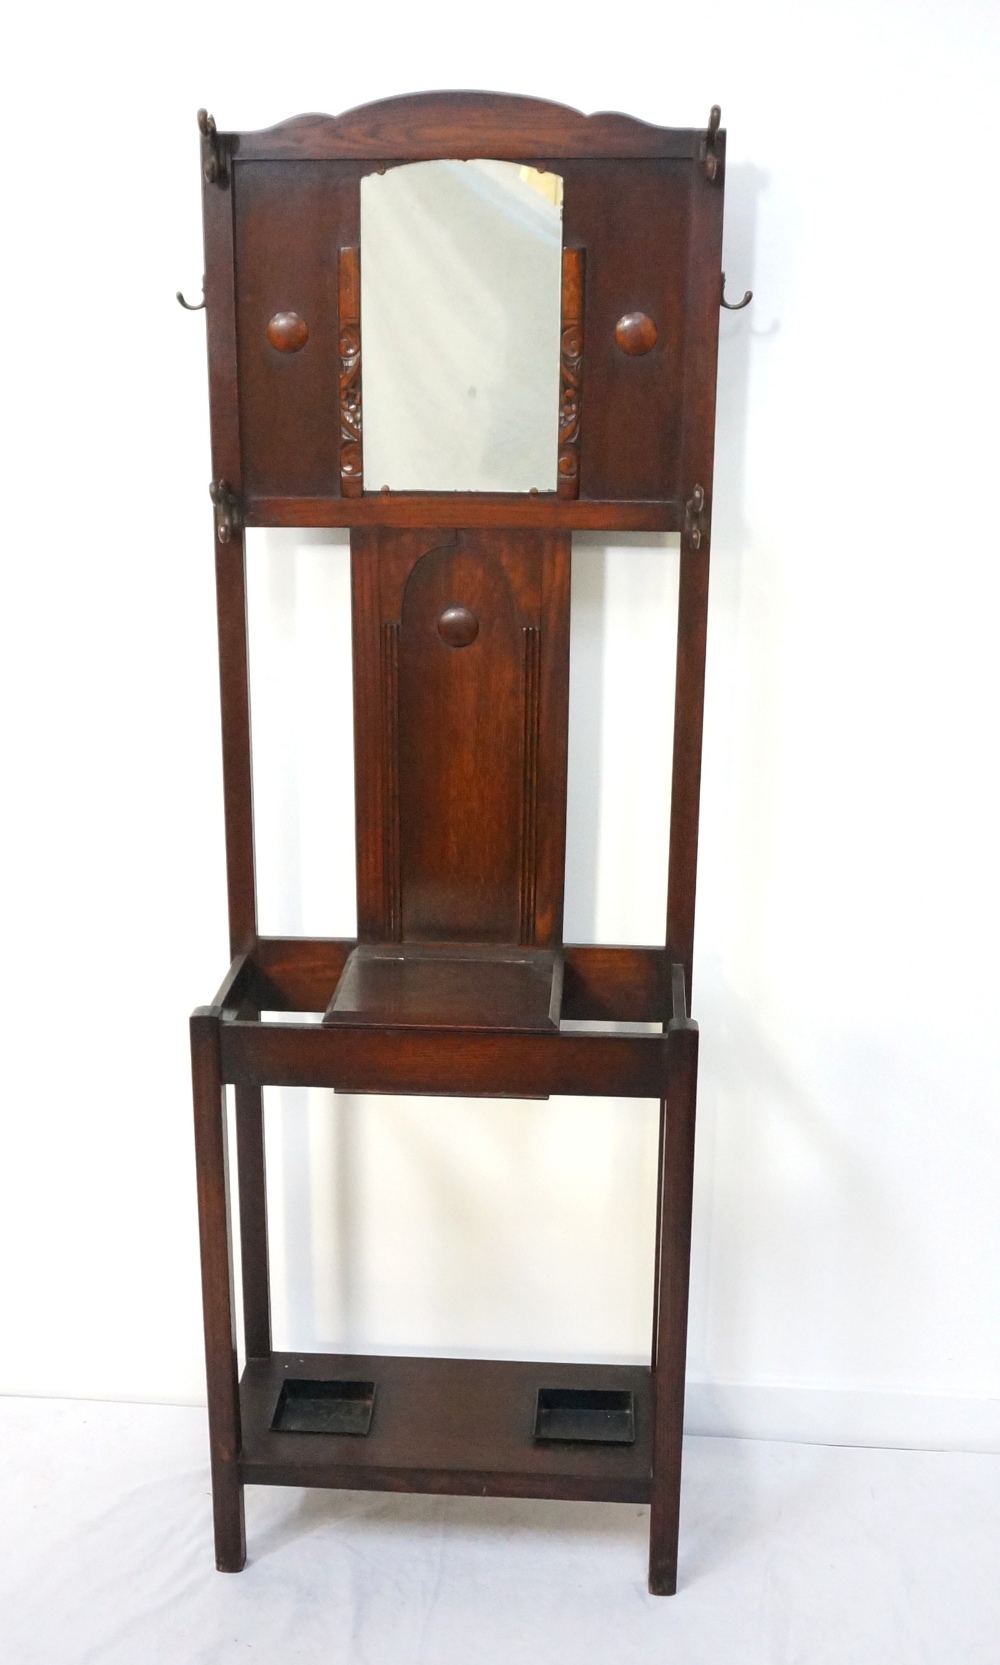 1920's OAK HALLSTAND with upper central mirror, glove box and provision for canes and umbrellas,